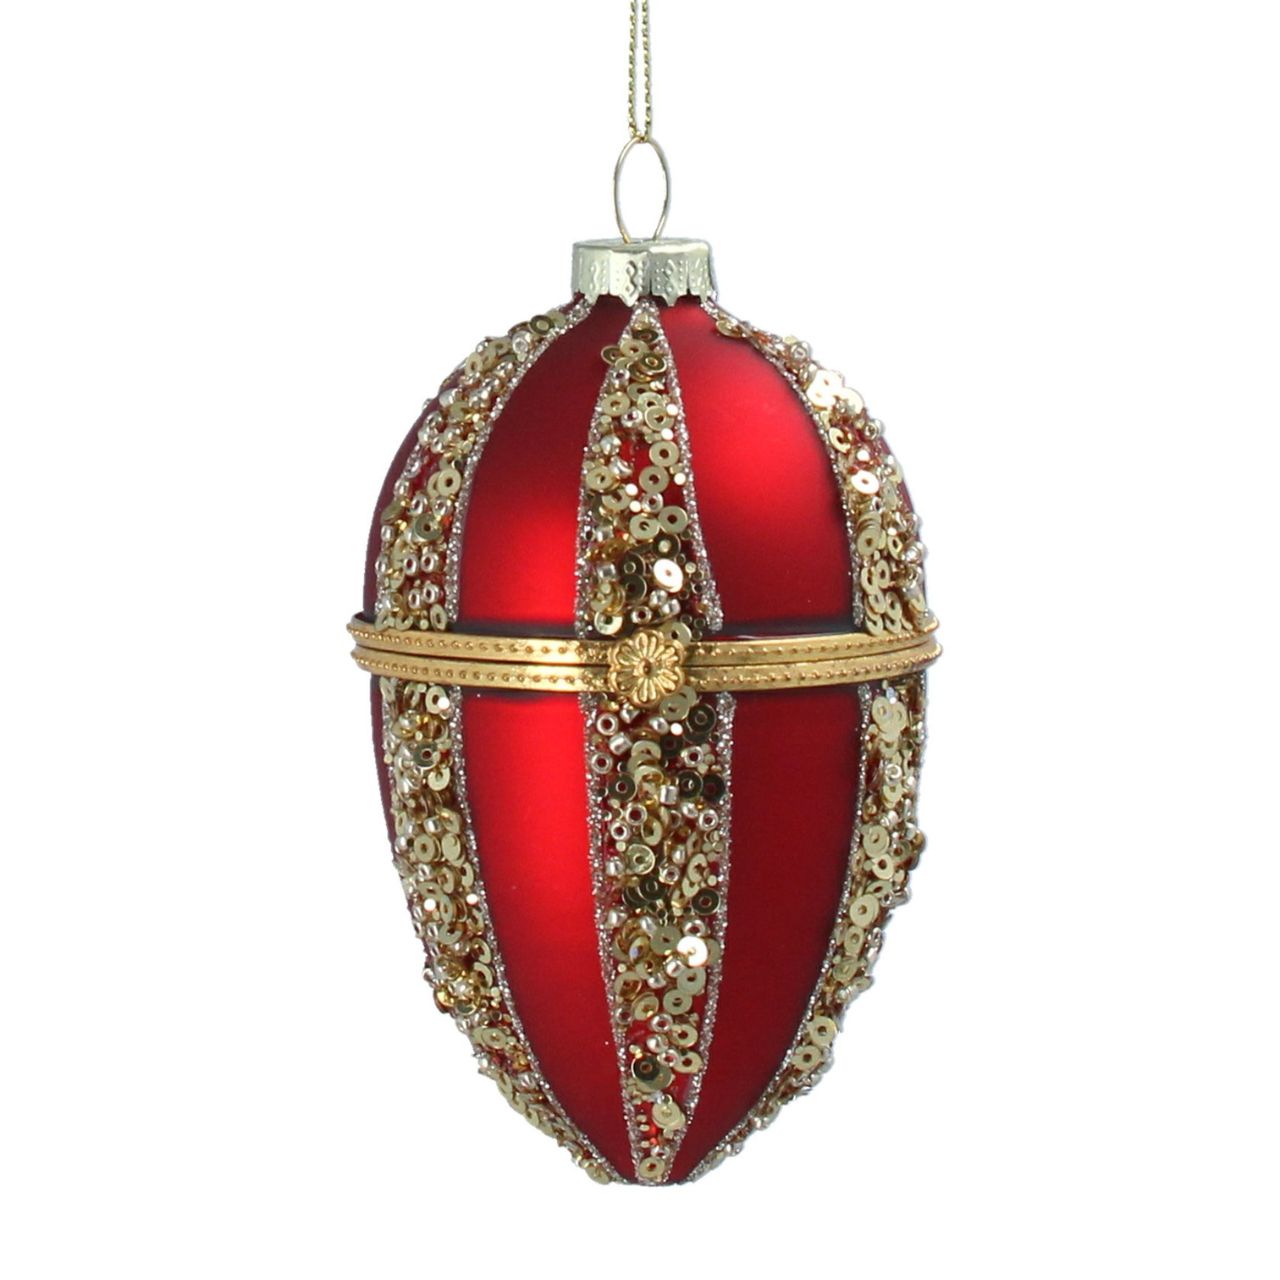 Gisela Graham Matt Red & Gold Glitter Opening Egg Christmas Hanging Ornament  This Red & Gold Glitter Opening Egg Christmas Hanging Ornament from Gisela Graham is a festive, unique addition to any Christmas tree. Made from a matt red and gold glitter combination, this ornament can be opened up to reveal a hidden inside.